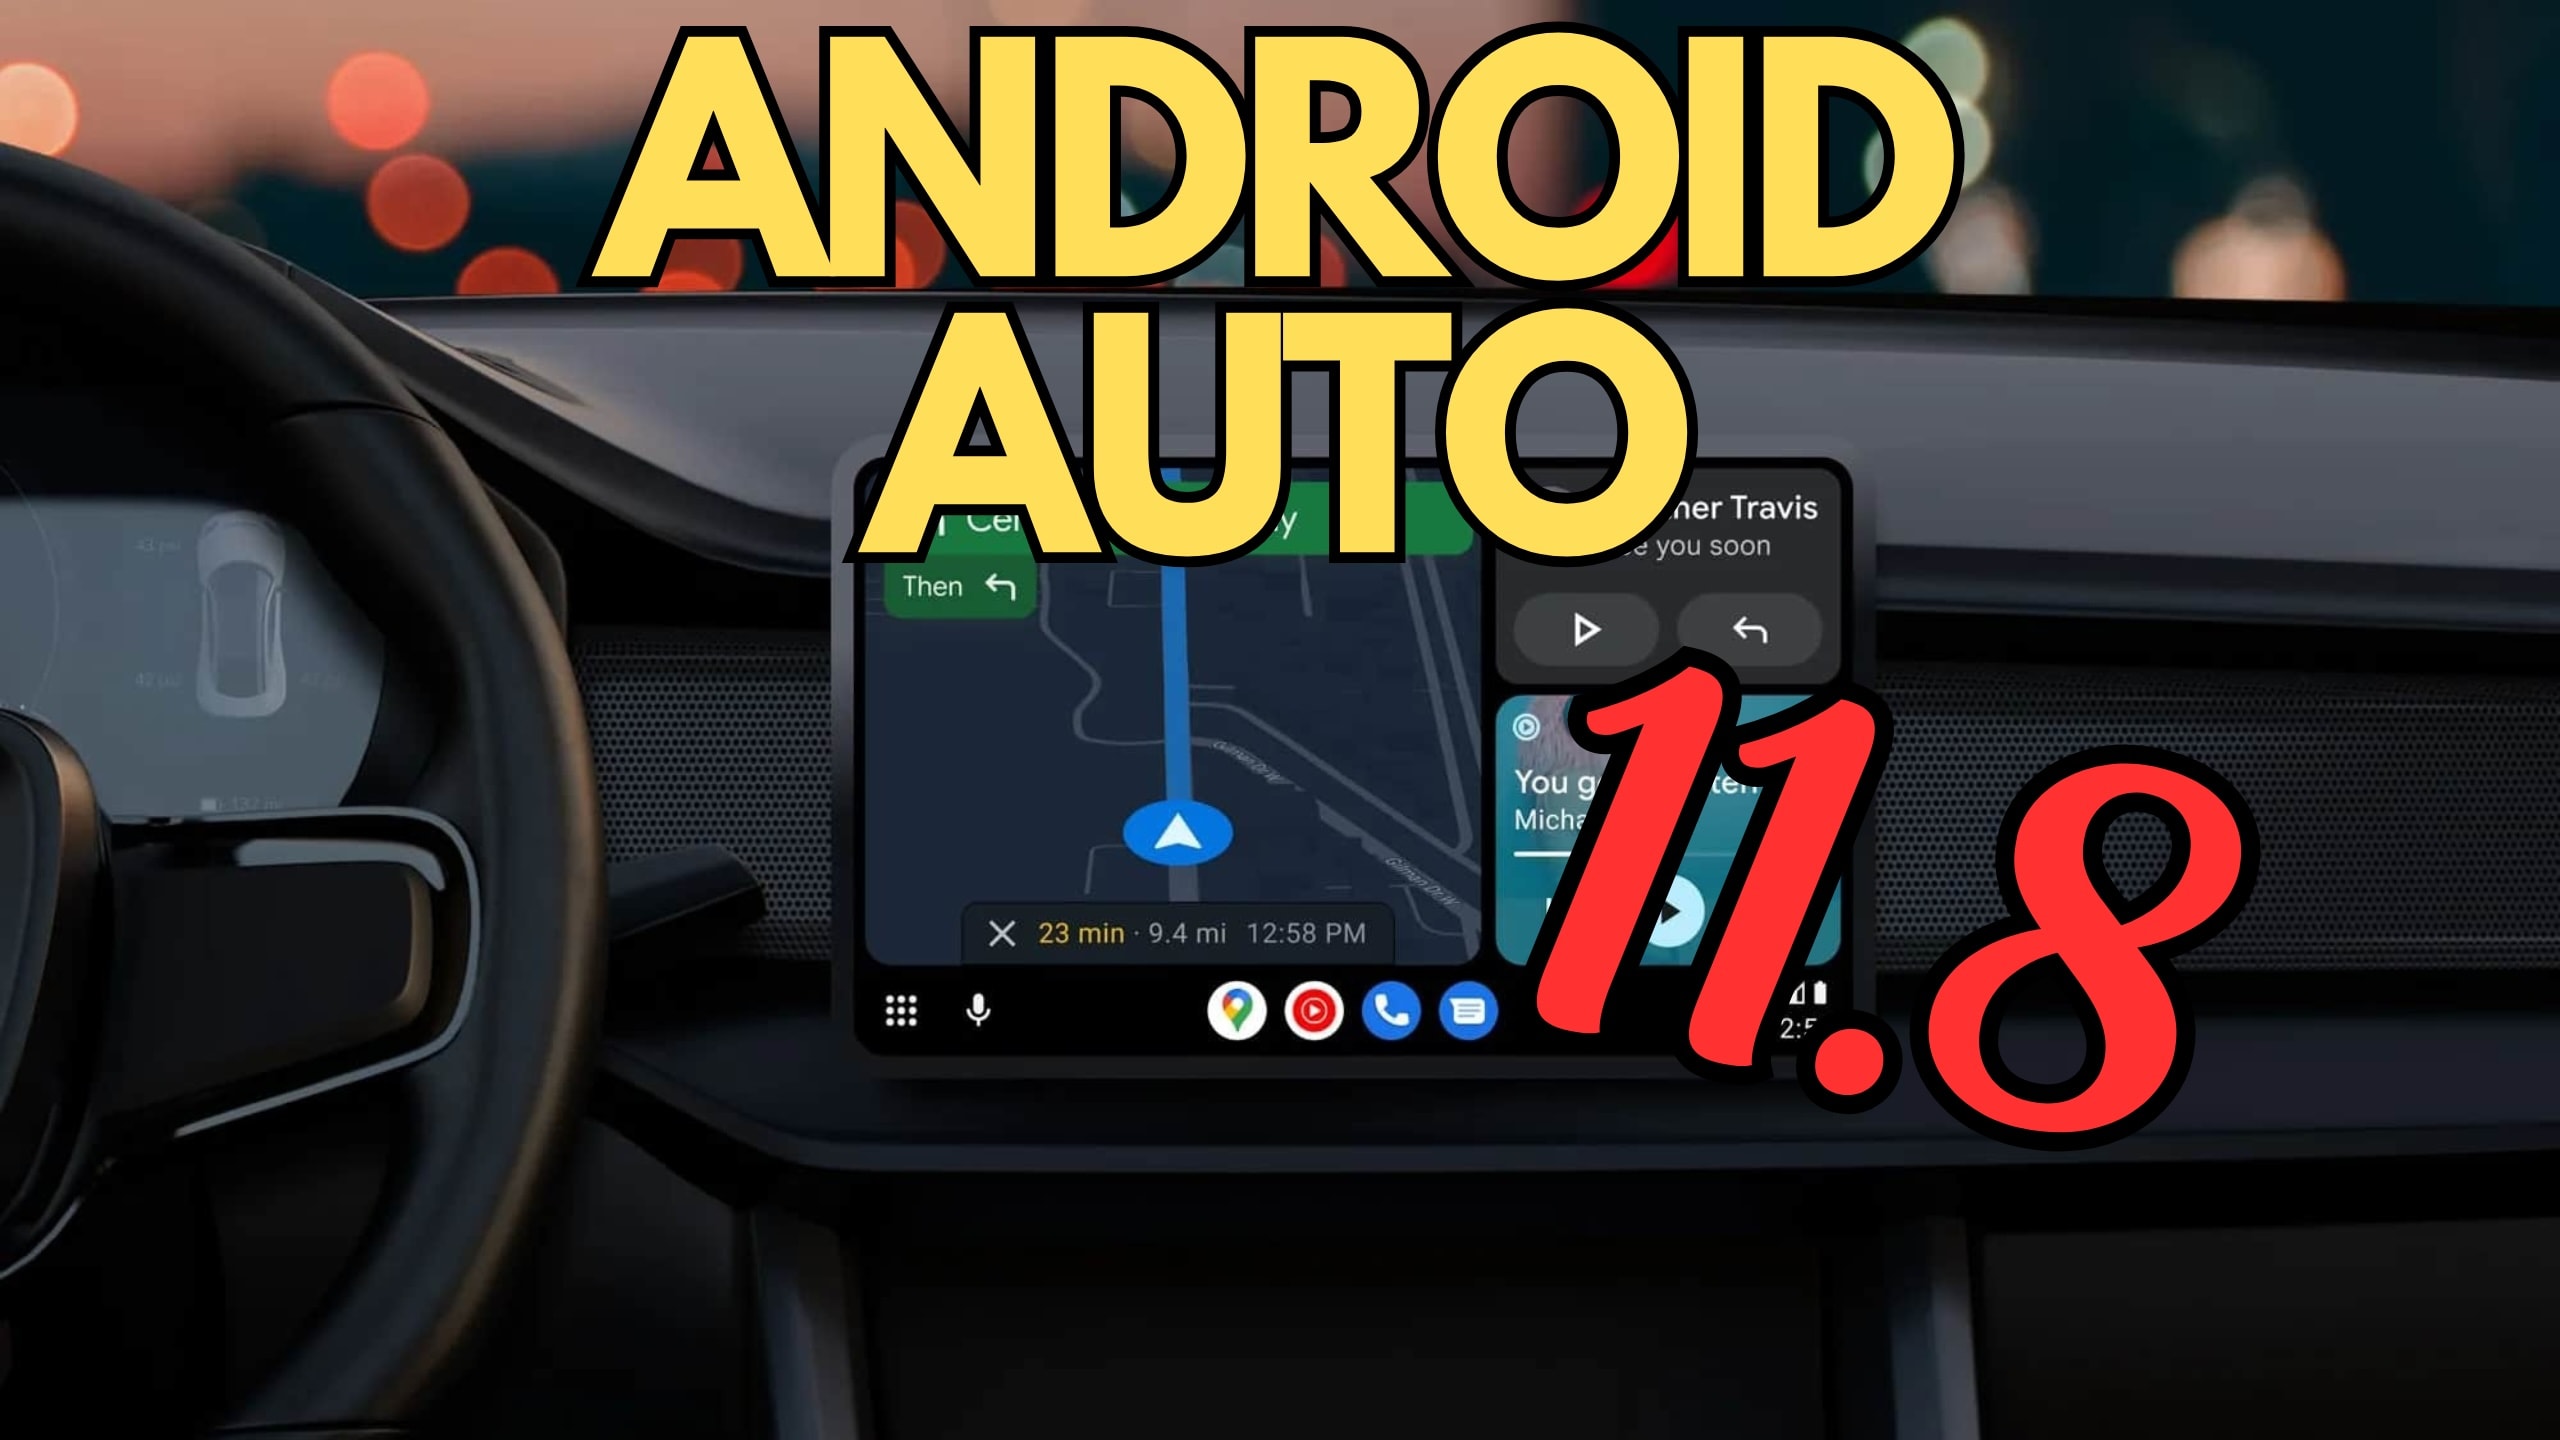 New Android Auto Update: Version 11.8 Now Available for All Users